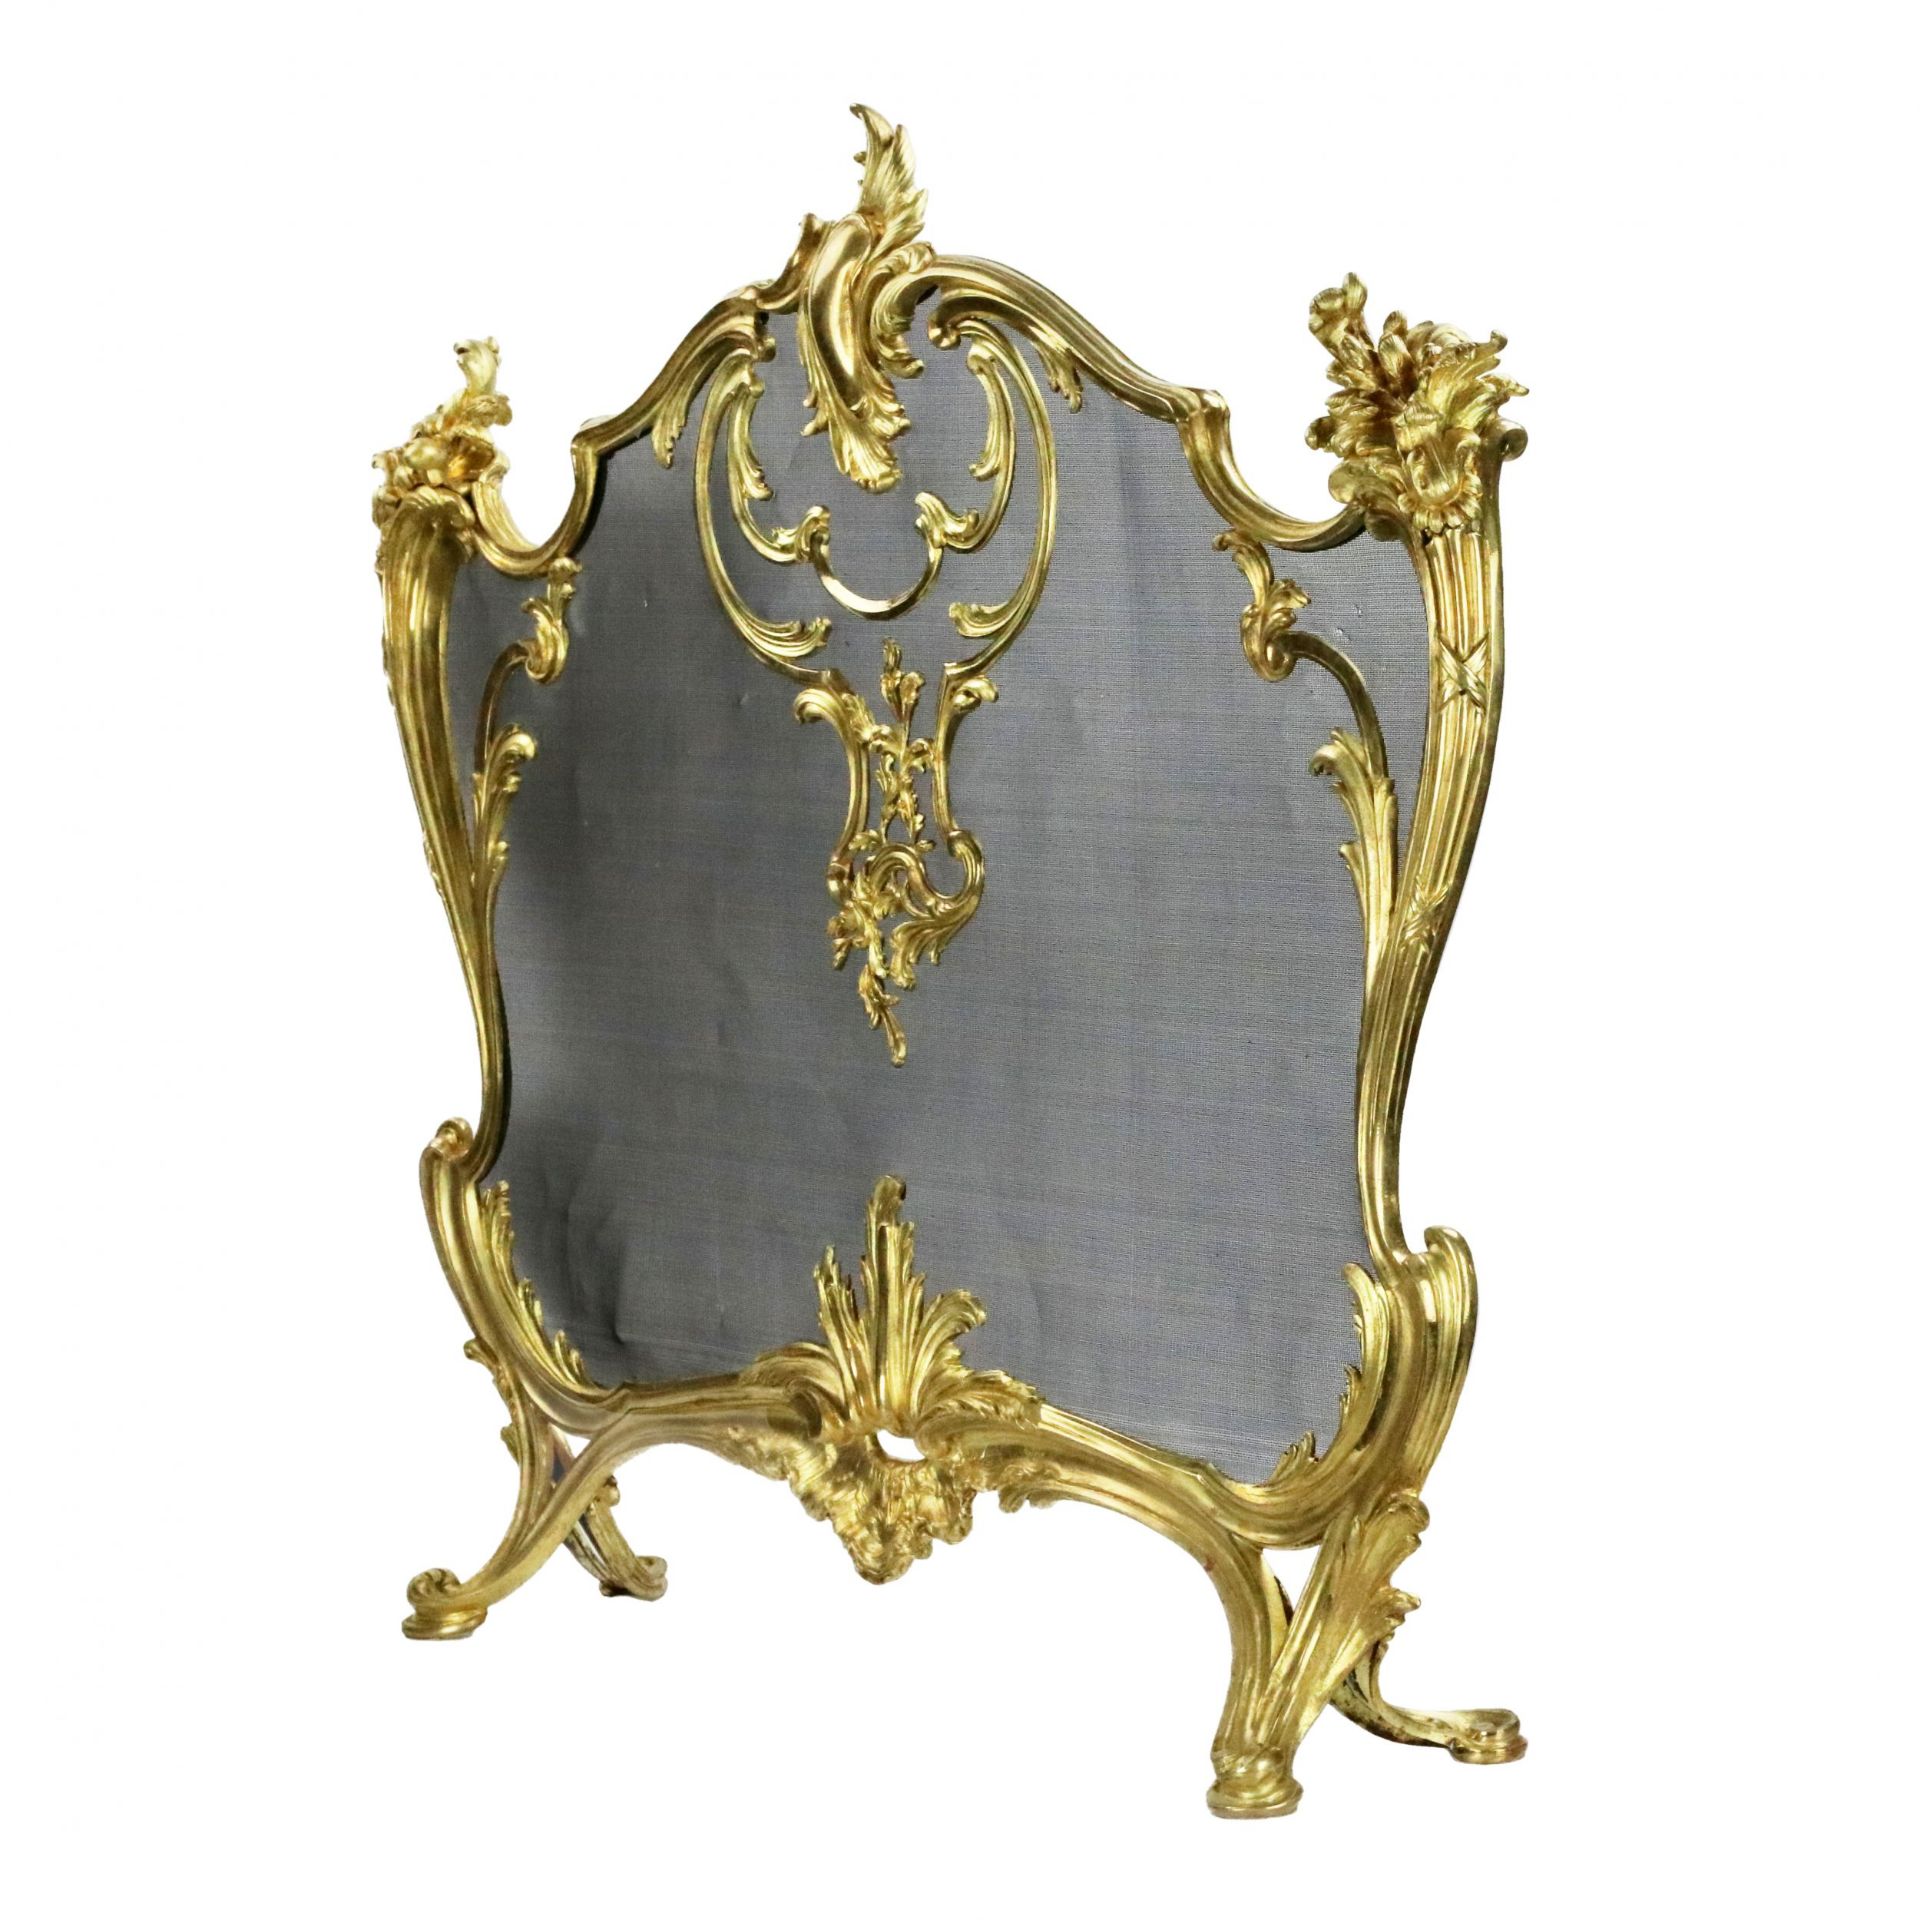 Bouhon. Fireplace screen in gilded bronze with metal protective mesh, Louis XV style. - Image 2 of 5